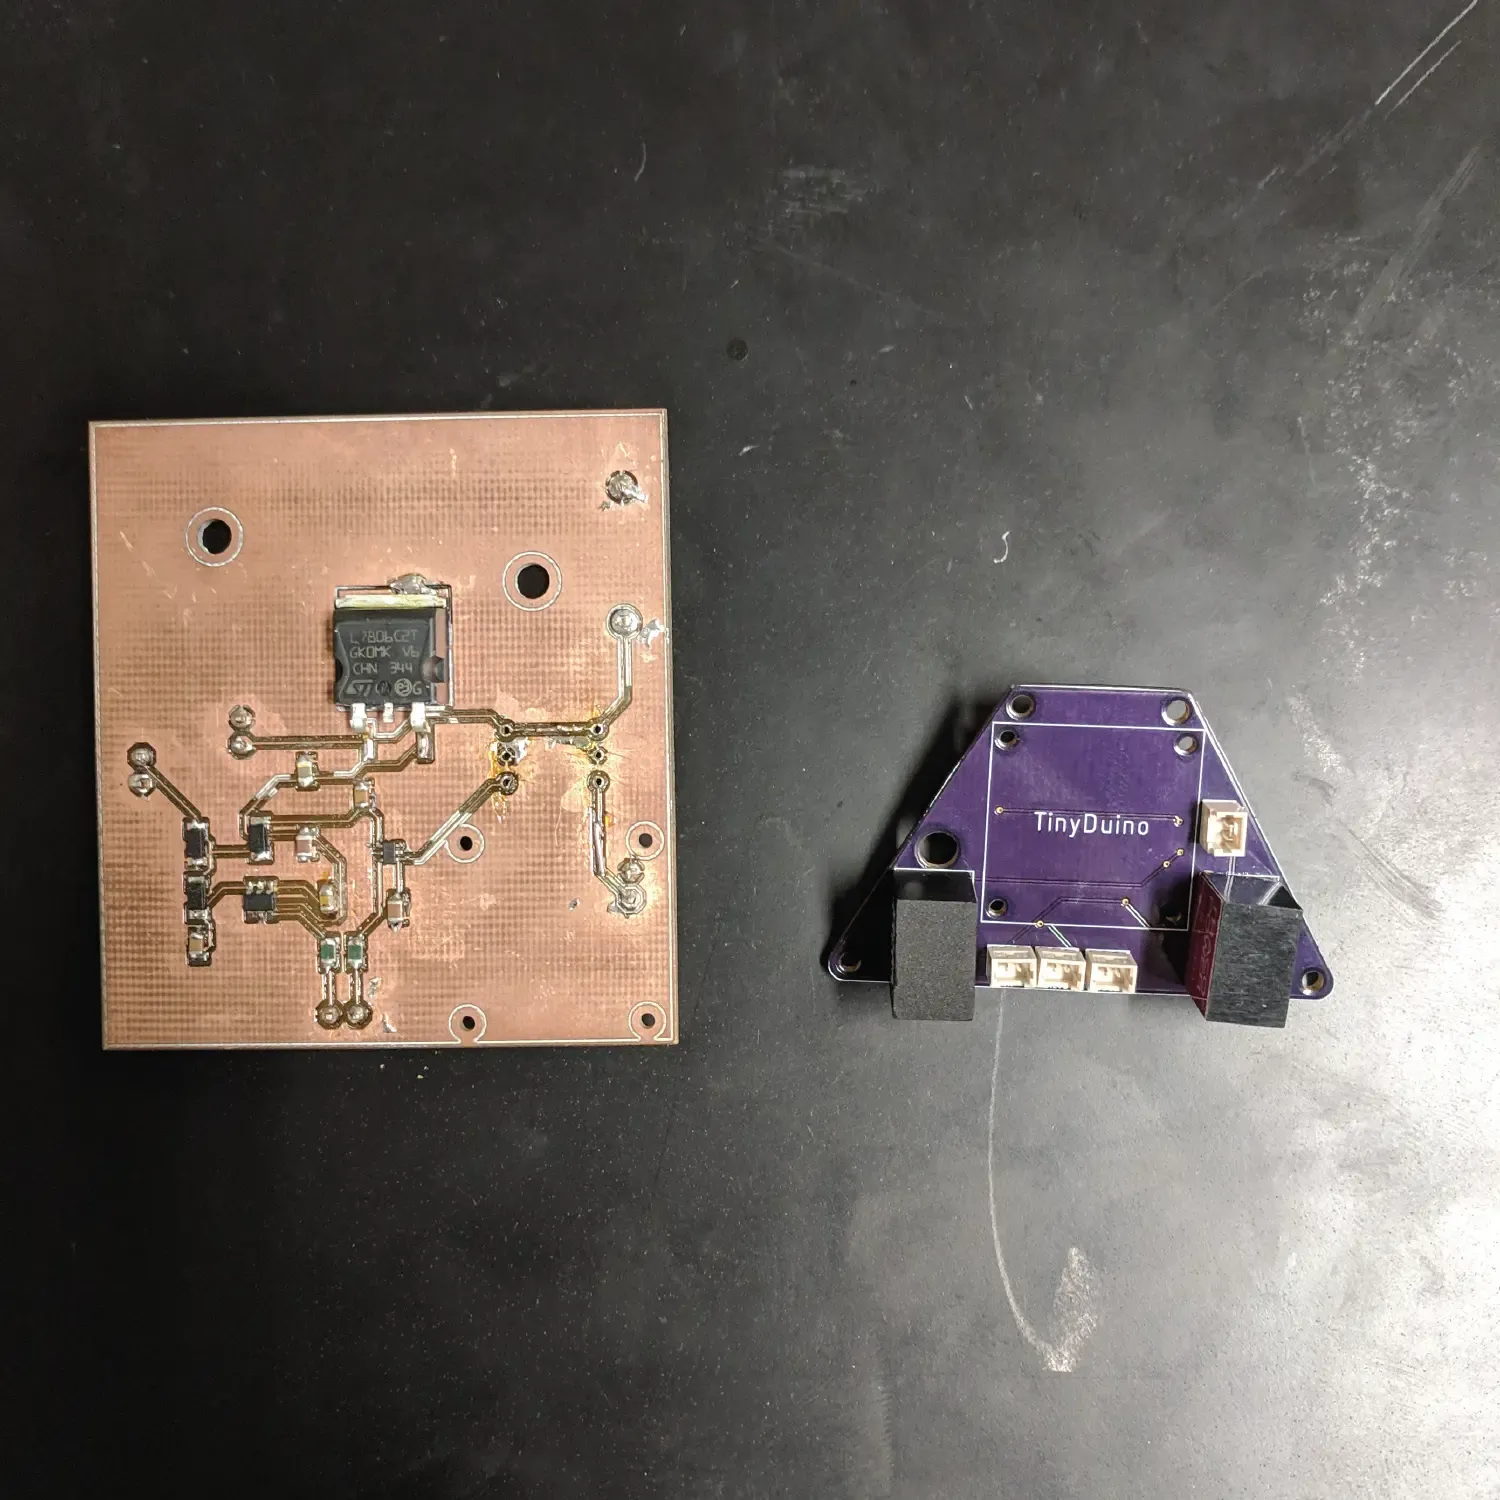 A side by side view of the prototype board with the completed board.